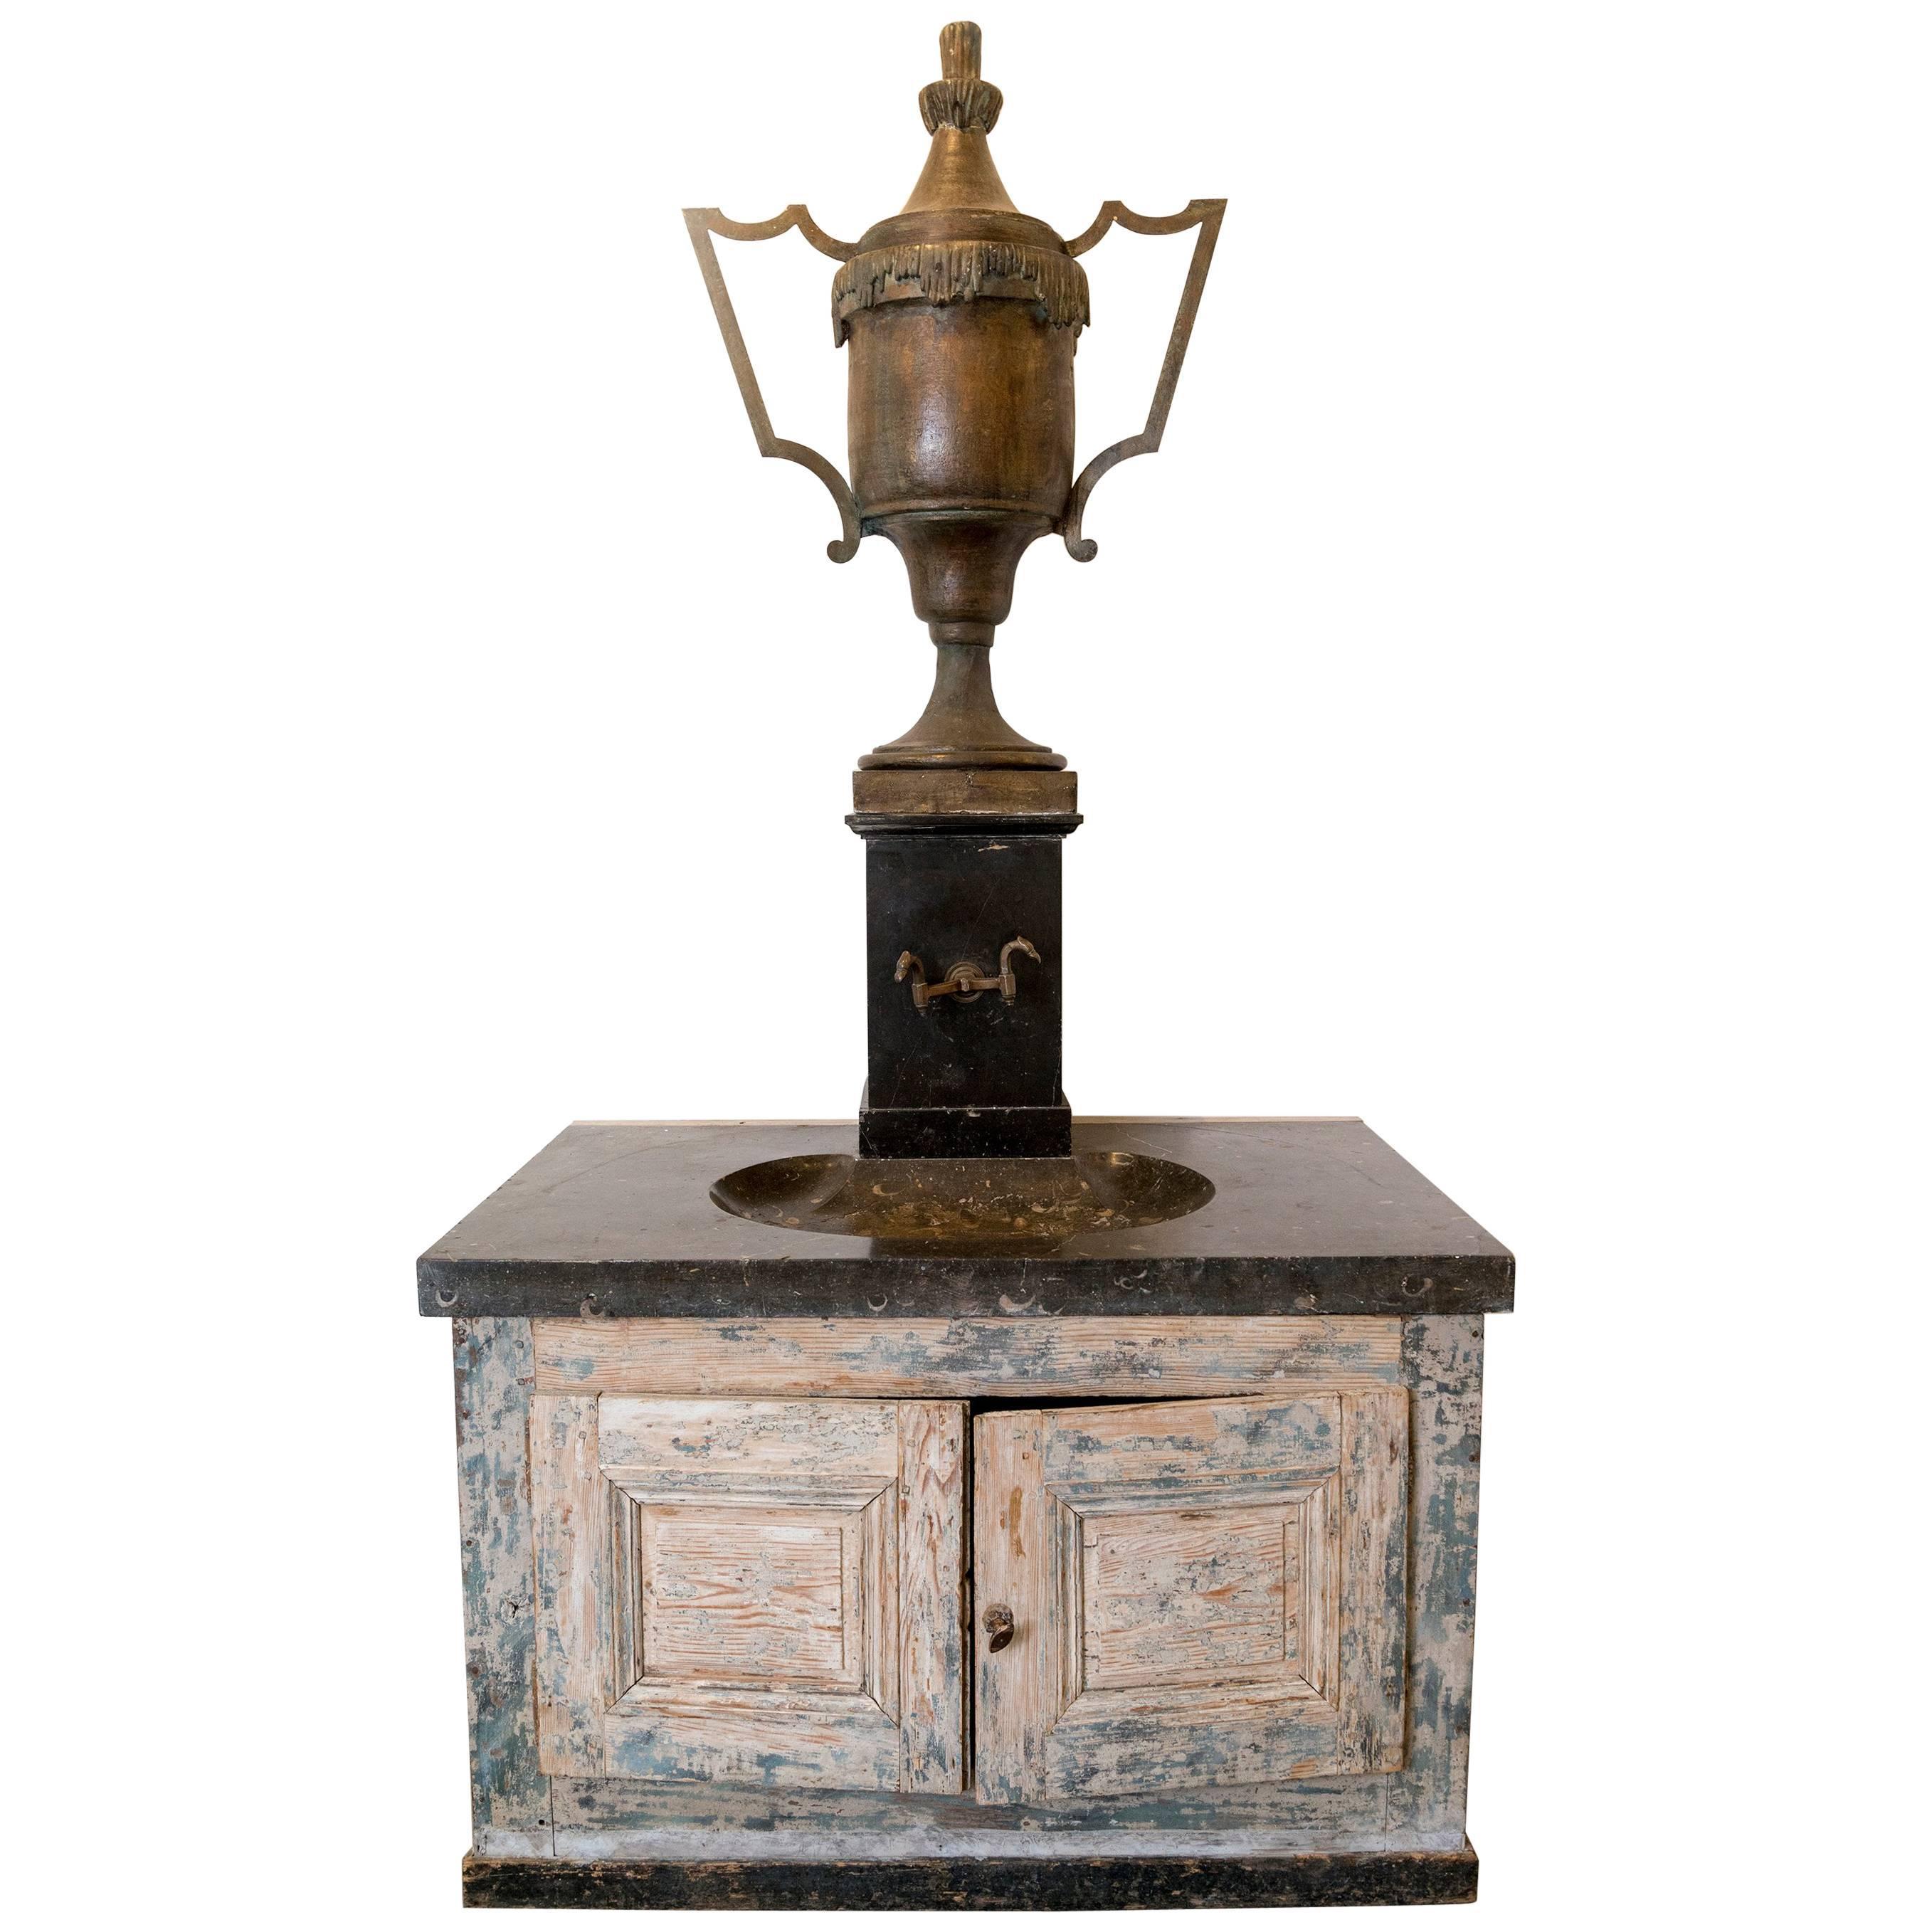 Bronze Vase Fountain with Black Marble Sink and Patina Base